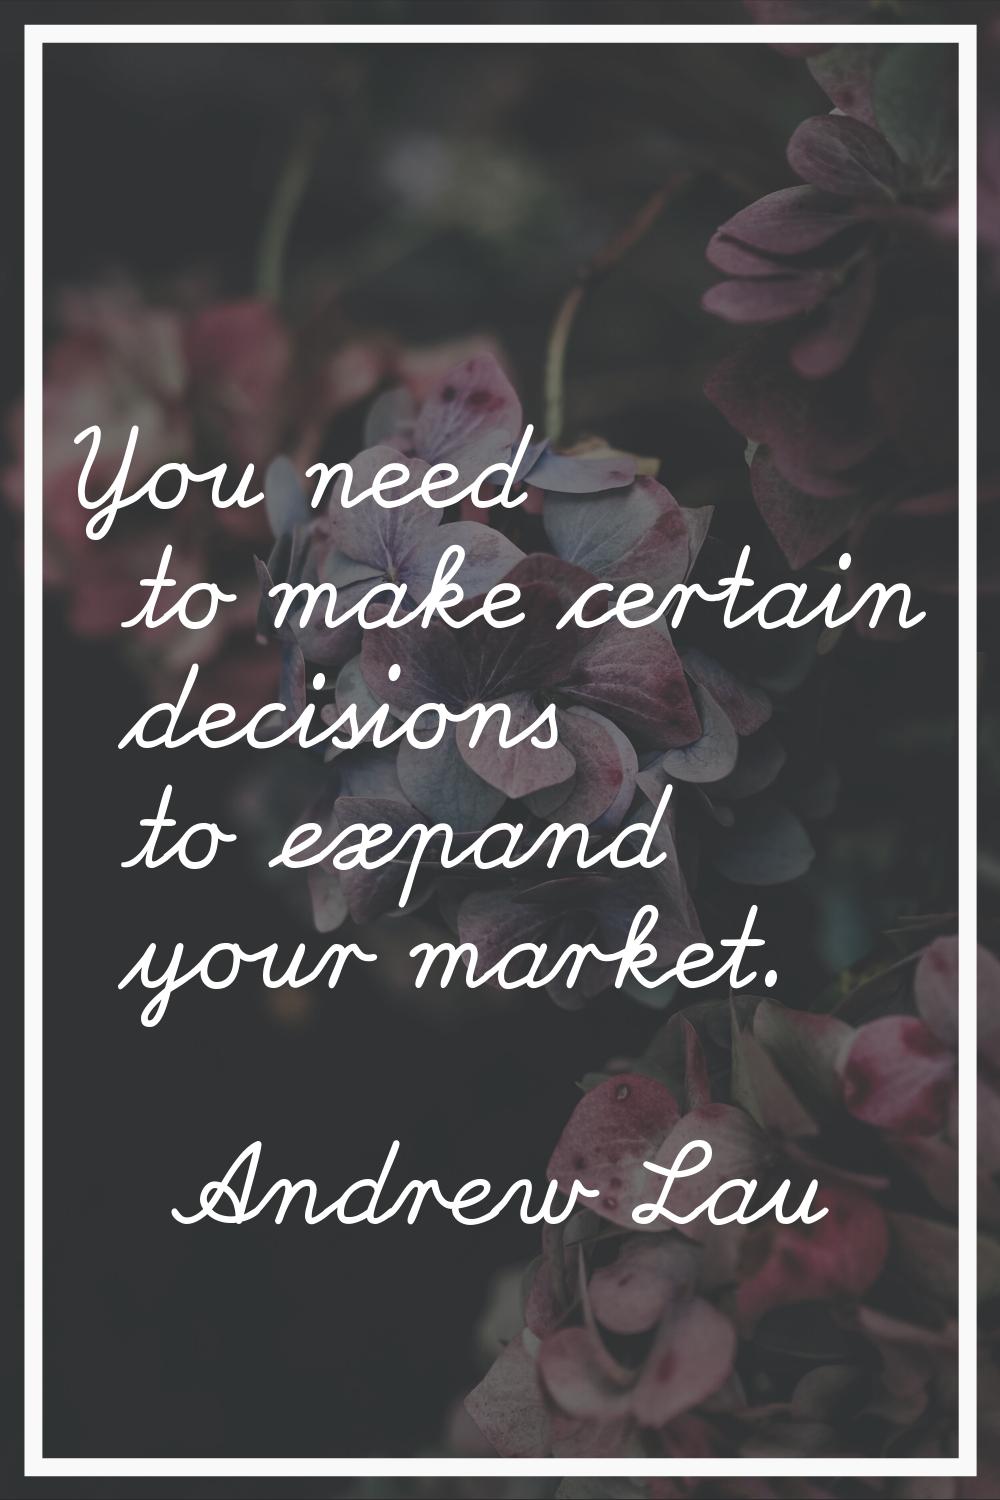 You need to make certain decisions to expand your market.